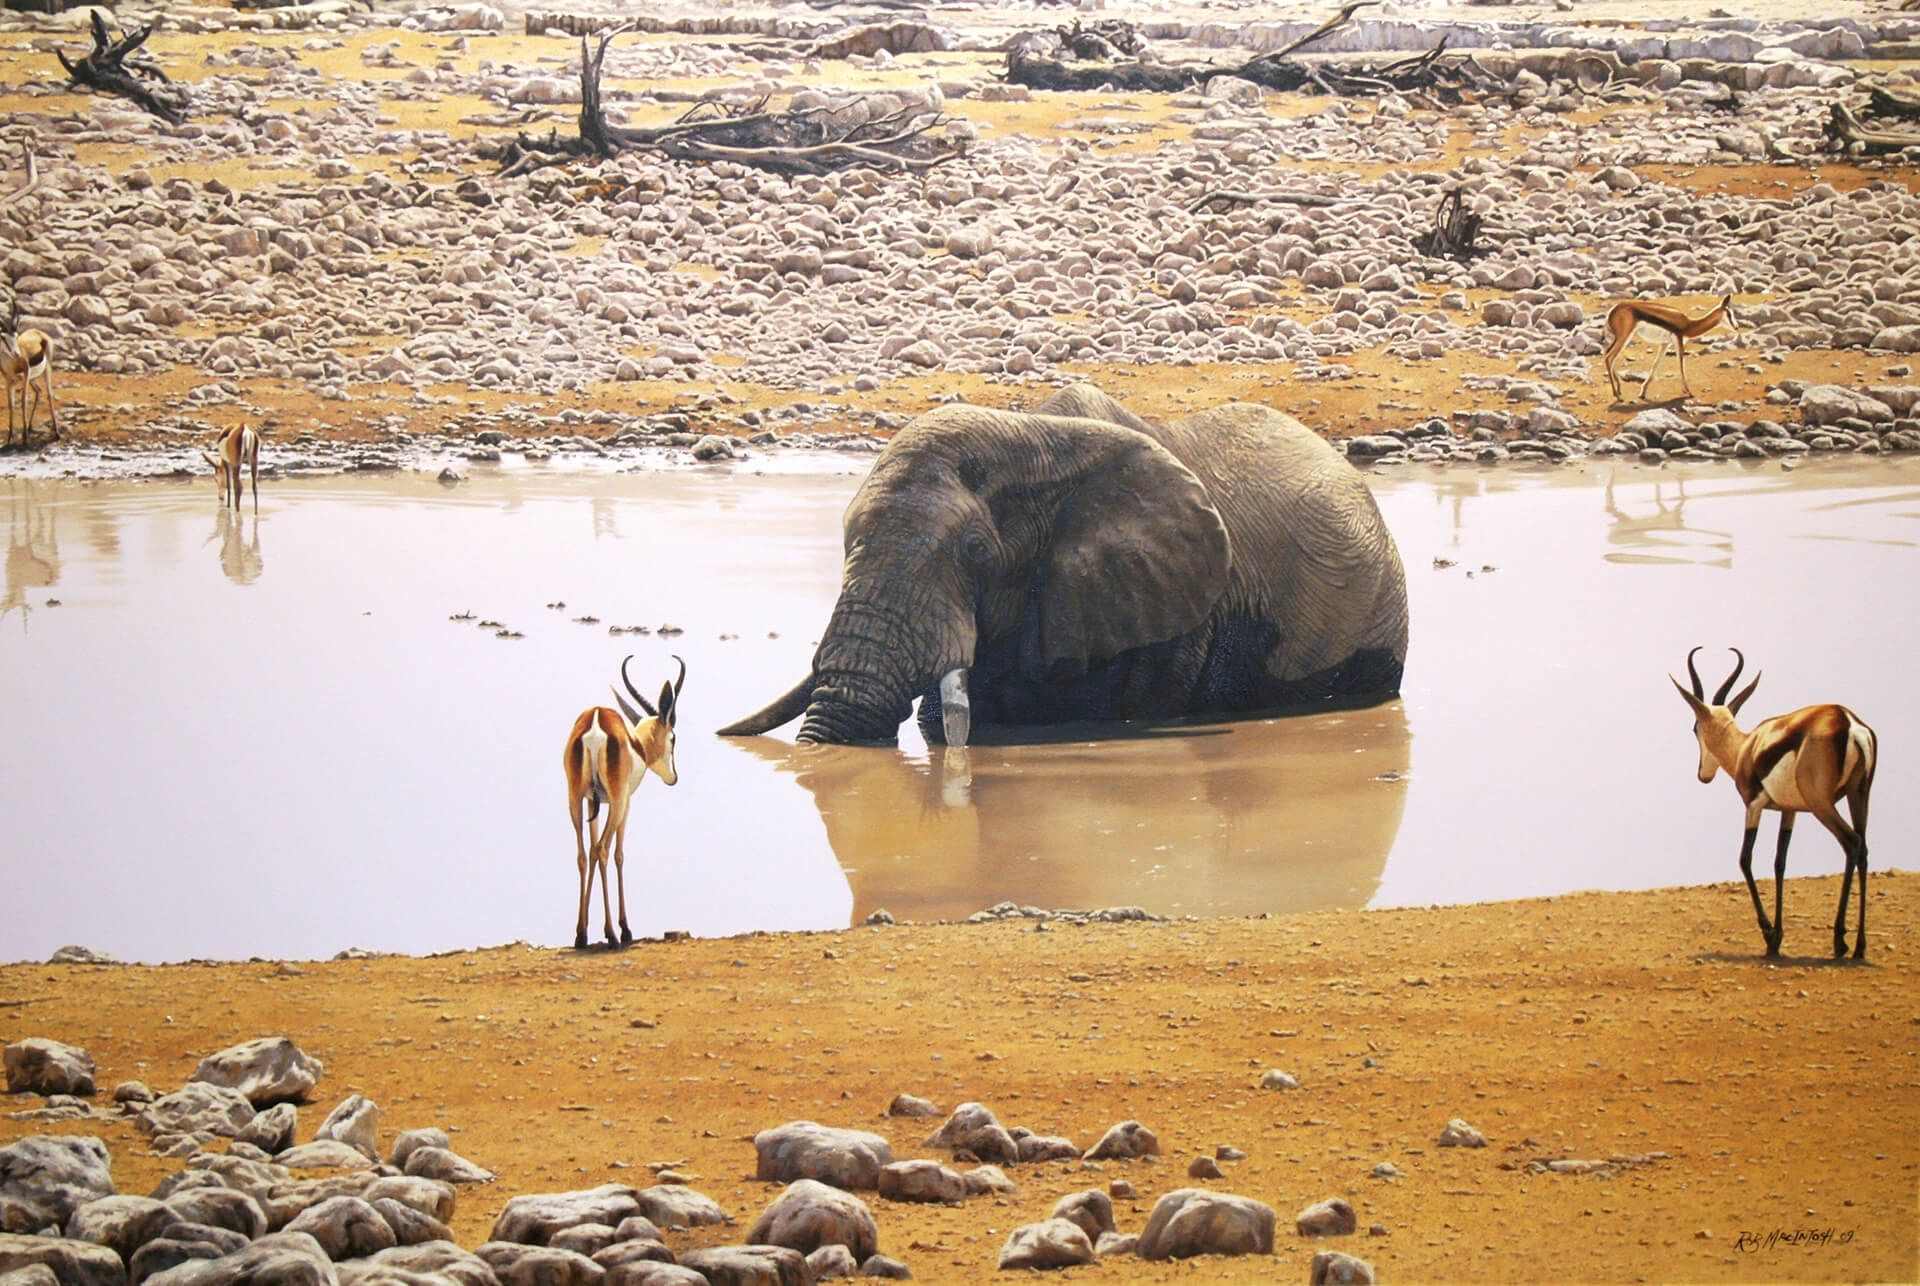 Photorealistic painting of an elephant submerged in lake